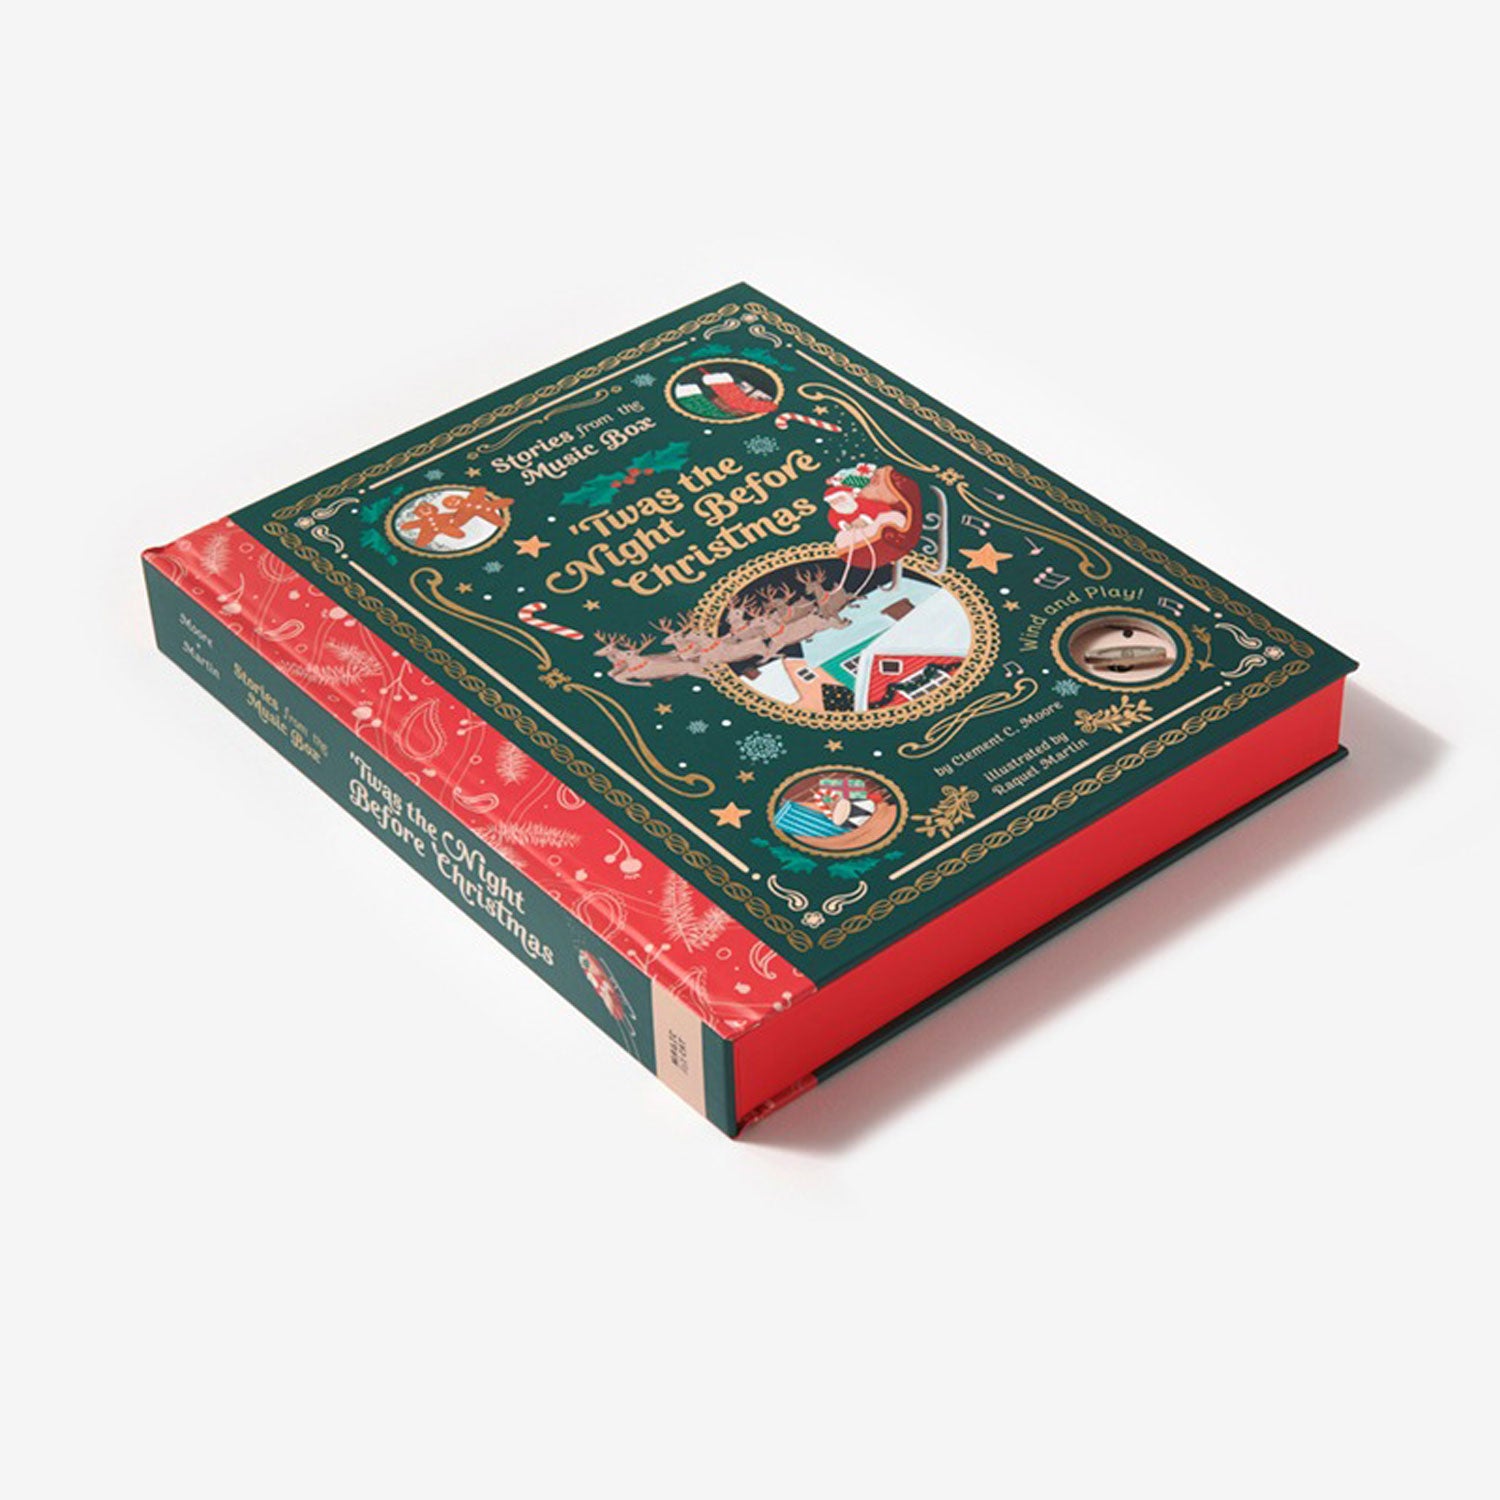 Abrams Books Stories from the Music Box - Twas the Night Before Christmas Book